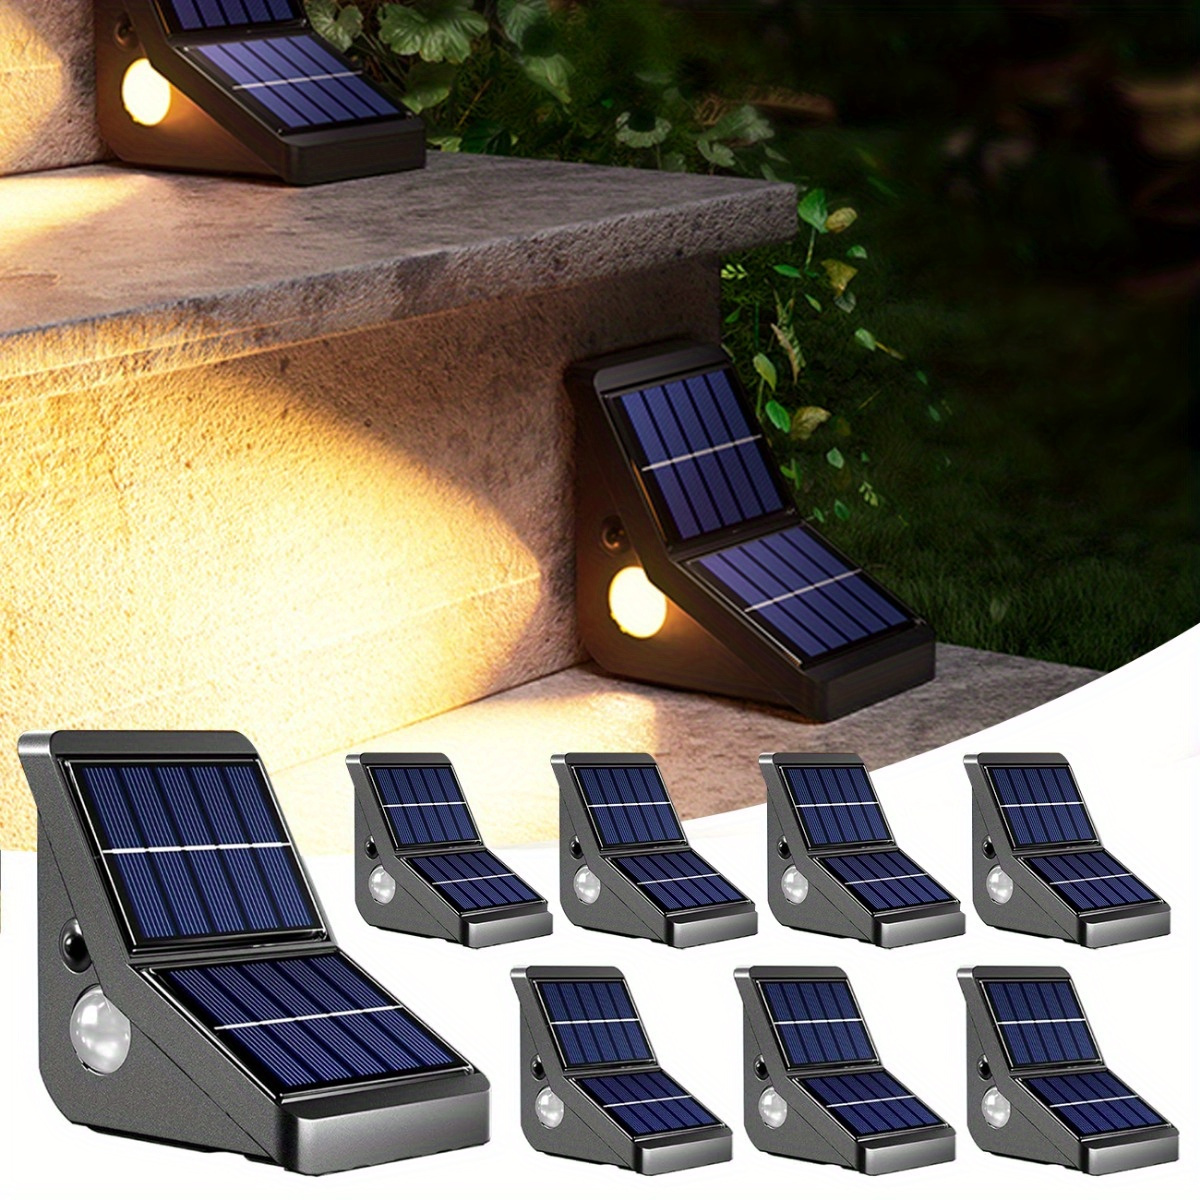 

Jackyled 8 Pack Solar Step Lights For Outside, Outdoor Solar Lights With 3 Color Light, Waterproof Solar Deck Lights, Stair Lights Solar Powered For House Garden Yard Sideway (warm/cool/neutral White)